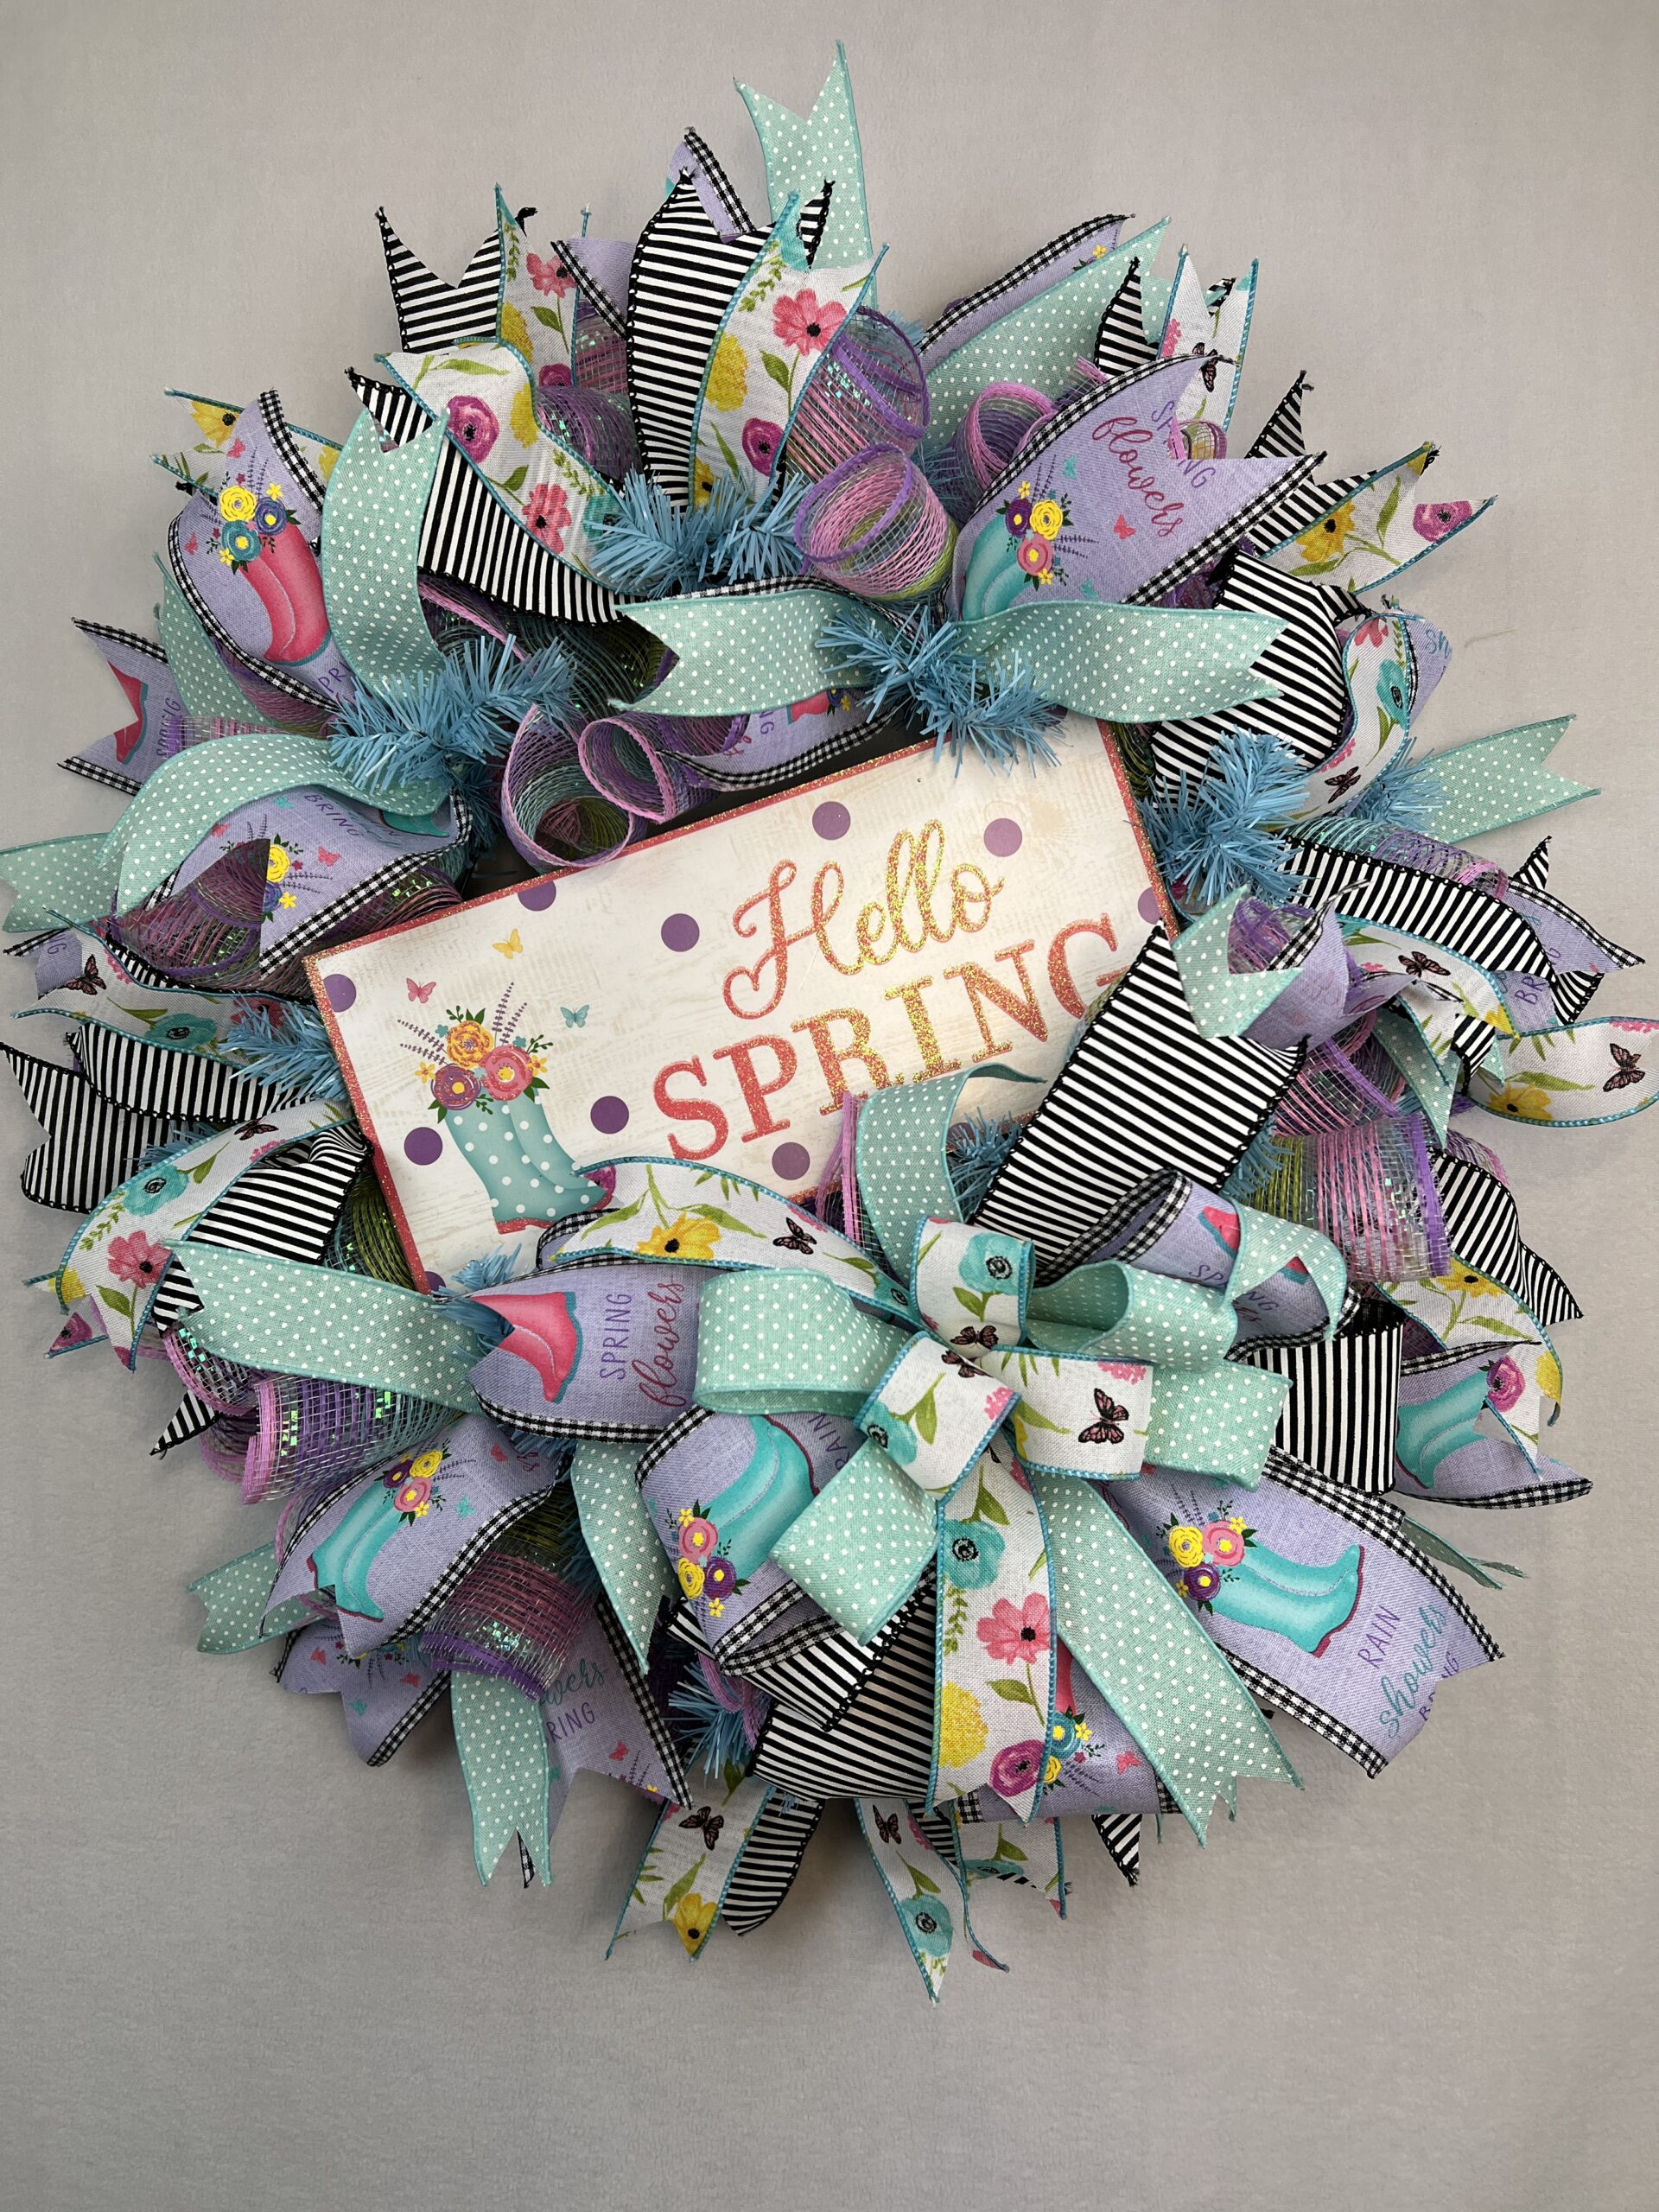 picture of a spring deco mesh wreath with hello spring sign and beautiful spring colored ribbons of purple, teal and whit with flowers